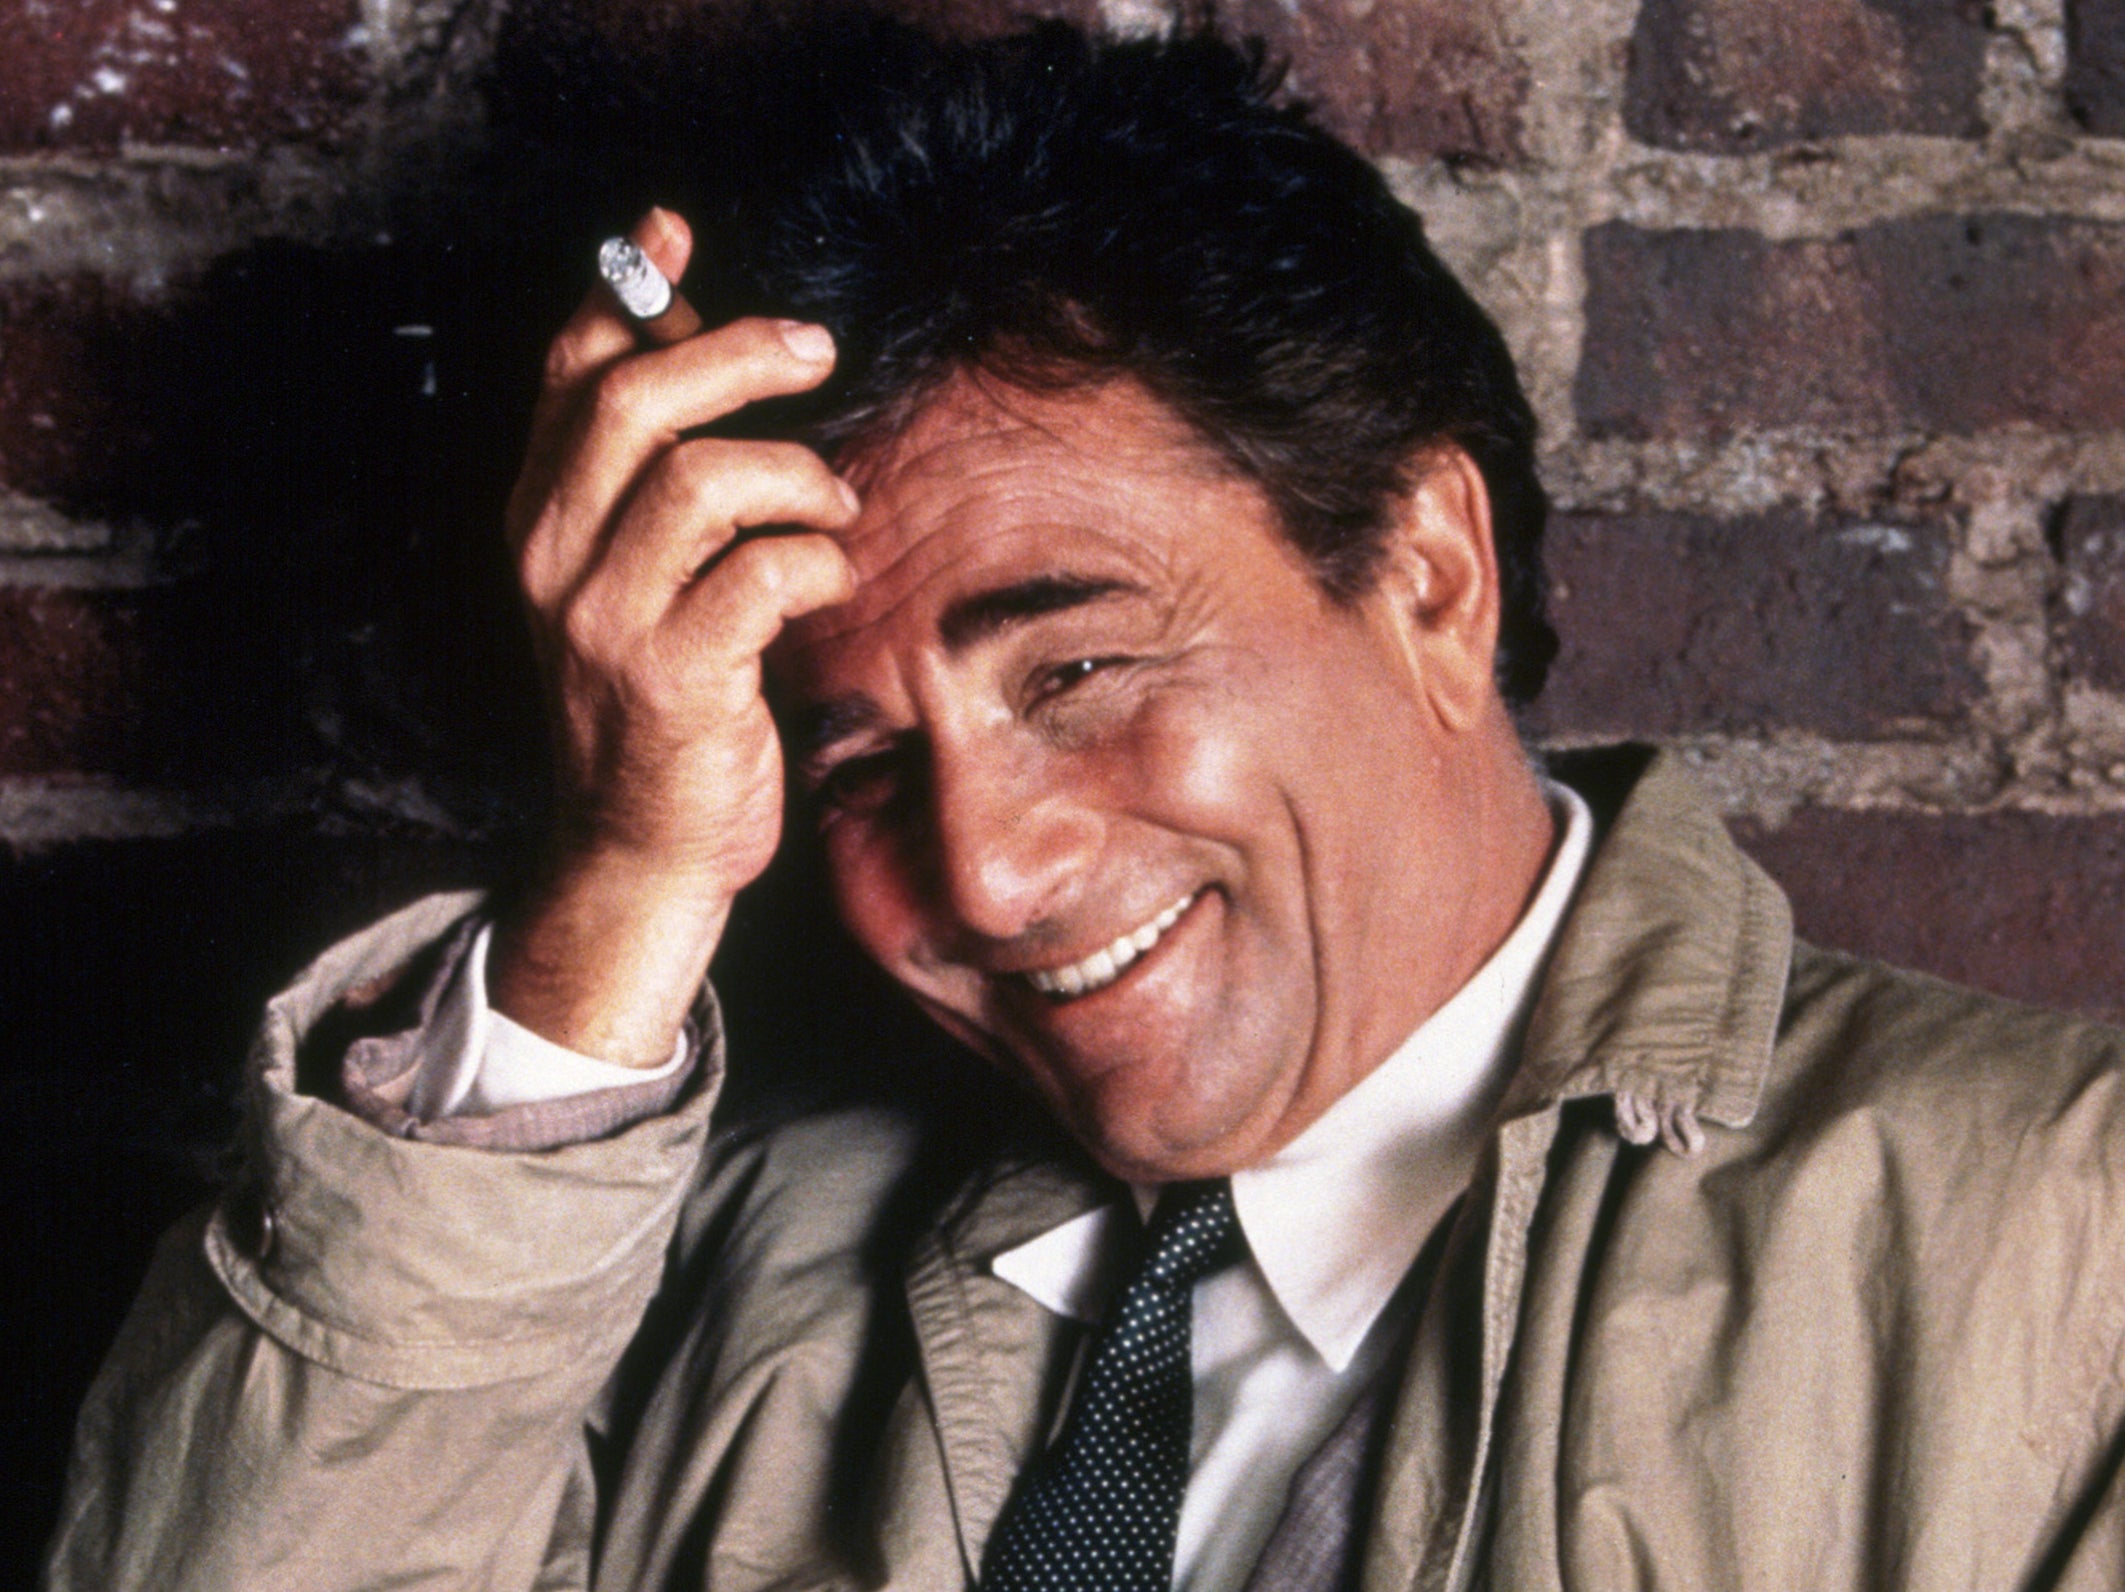 Falk’s performance as Columbo set him apart from traditional hard-nosed TV gumshoes